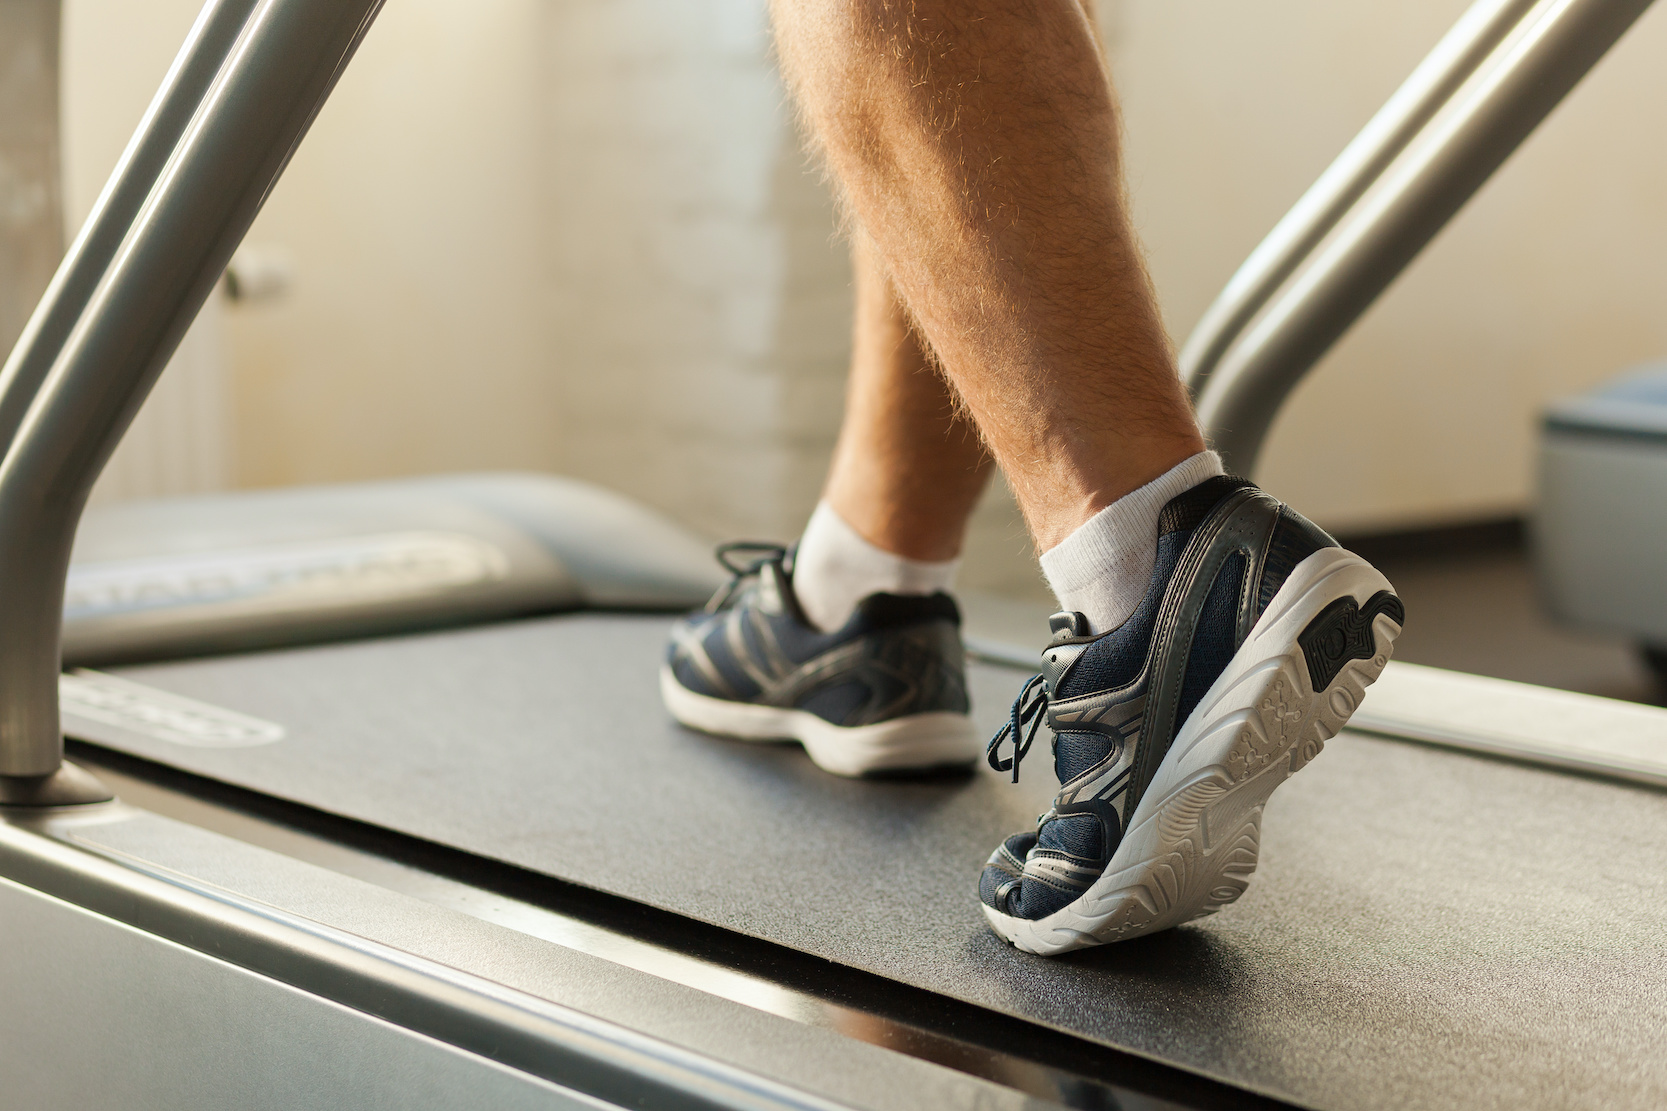 Exercising on treadmill. Close-up of man walking by treadmill in sports club